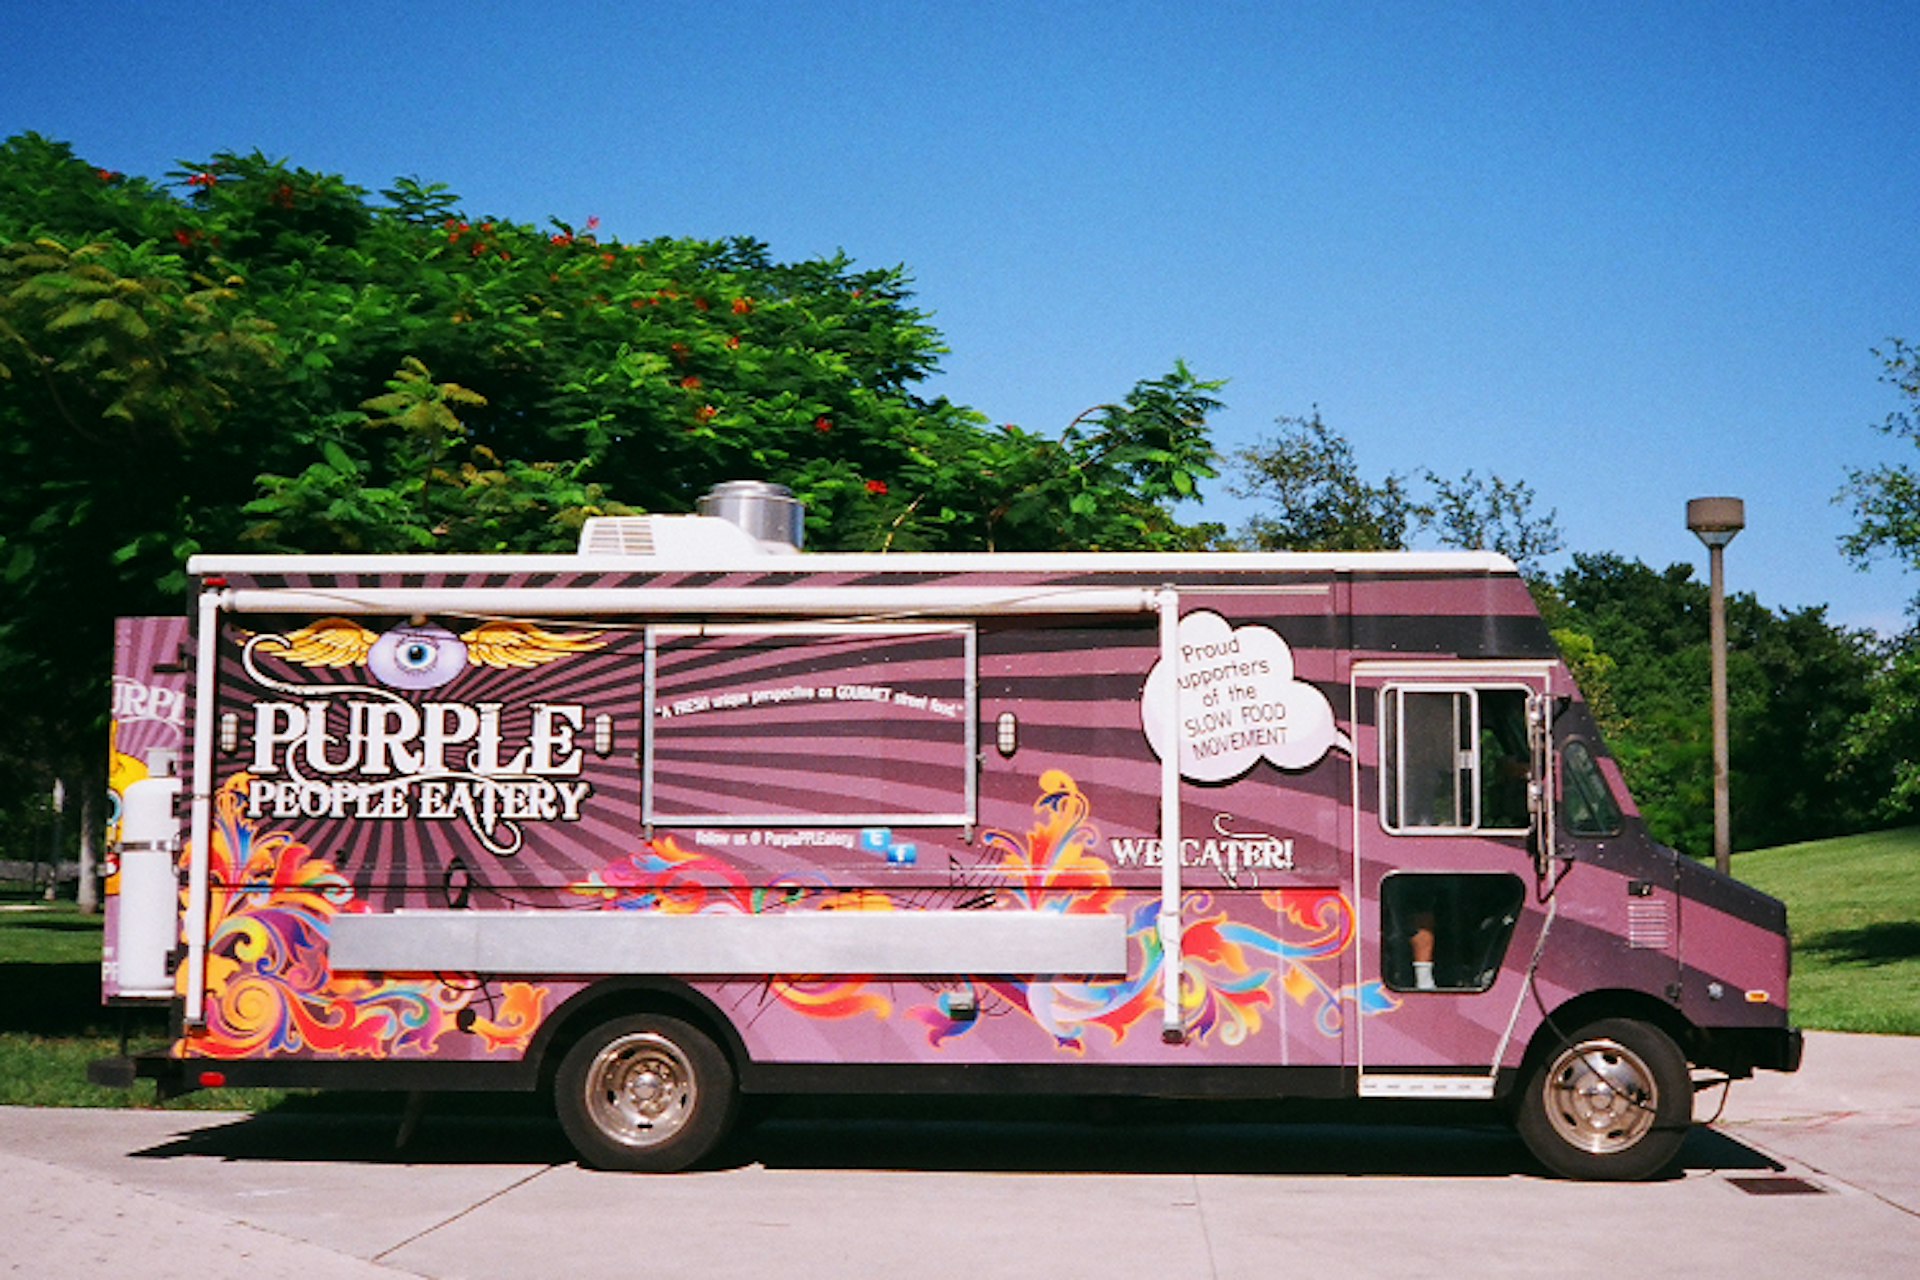 Purple People Eatery. Image by Phillip Pessar / CC BY 2.0